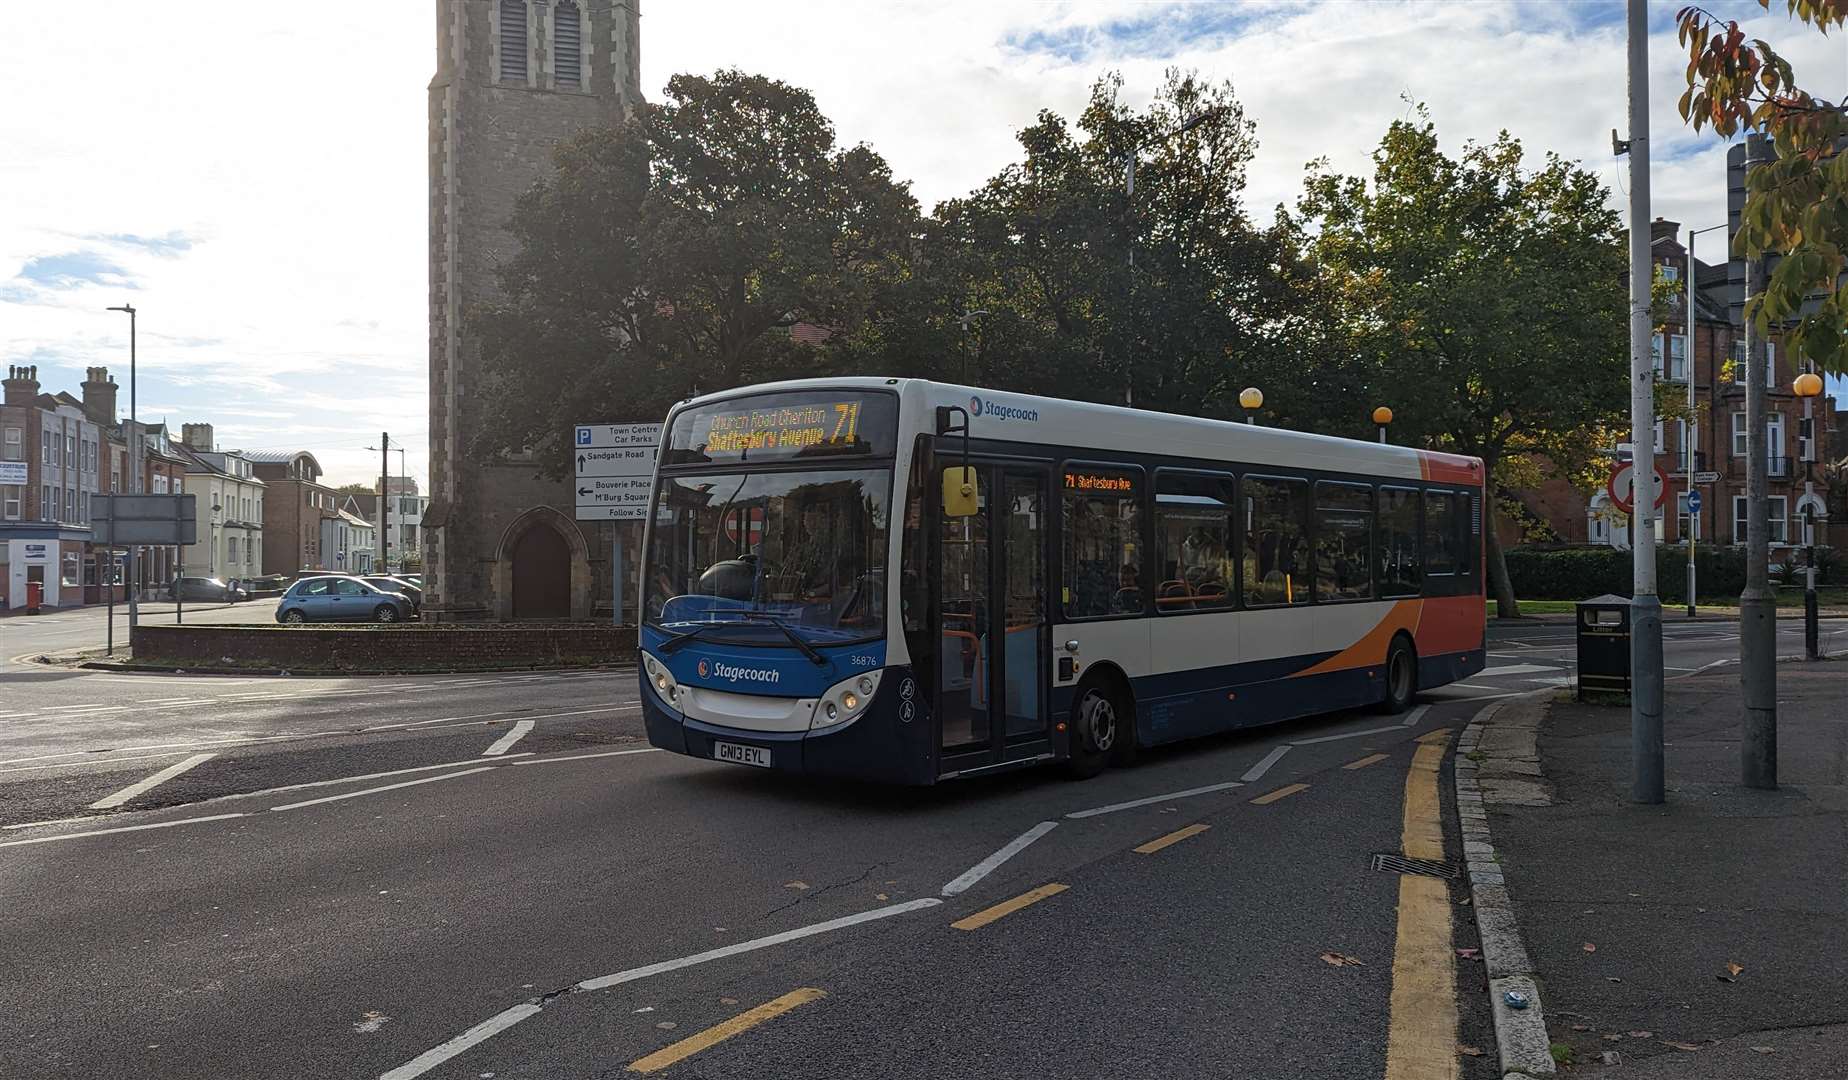 Stagecoach is being forced to cancel services because of staff shortages